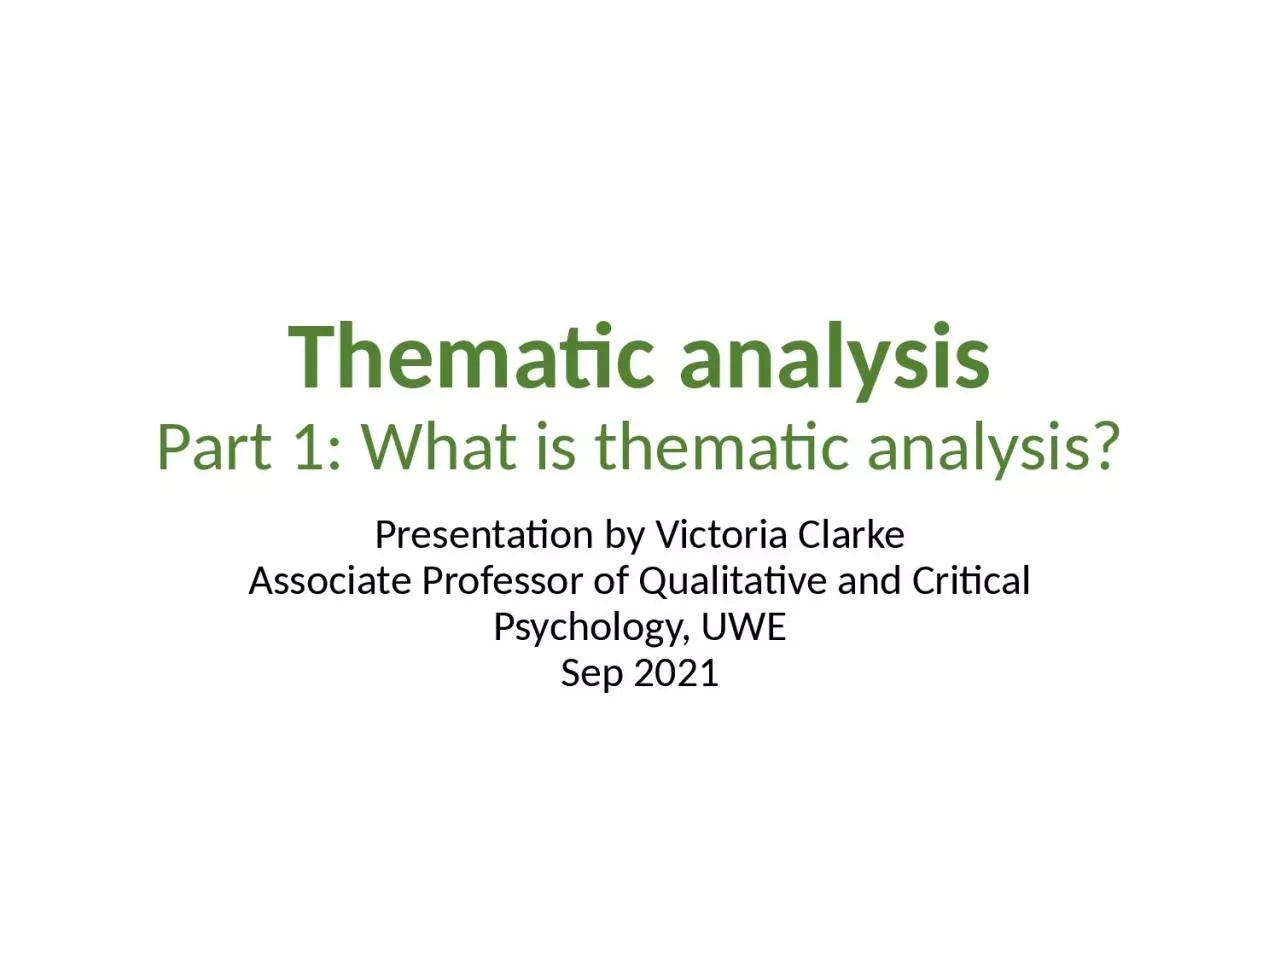 Thematic analysis Part 1: What is thematic analysis?